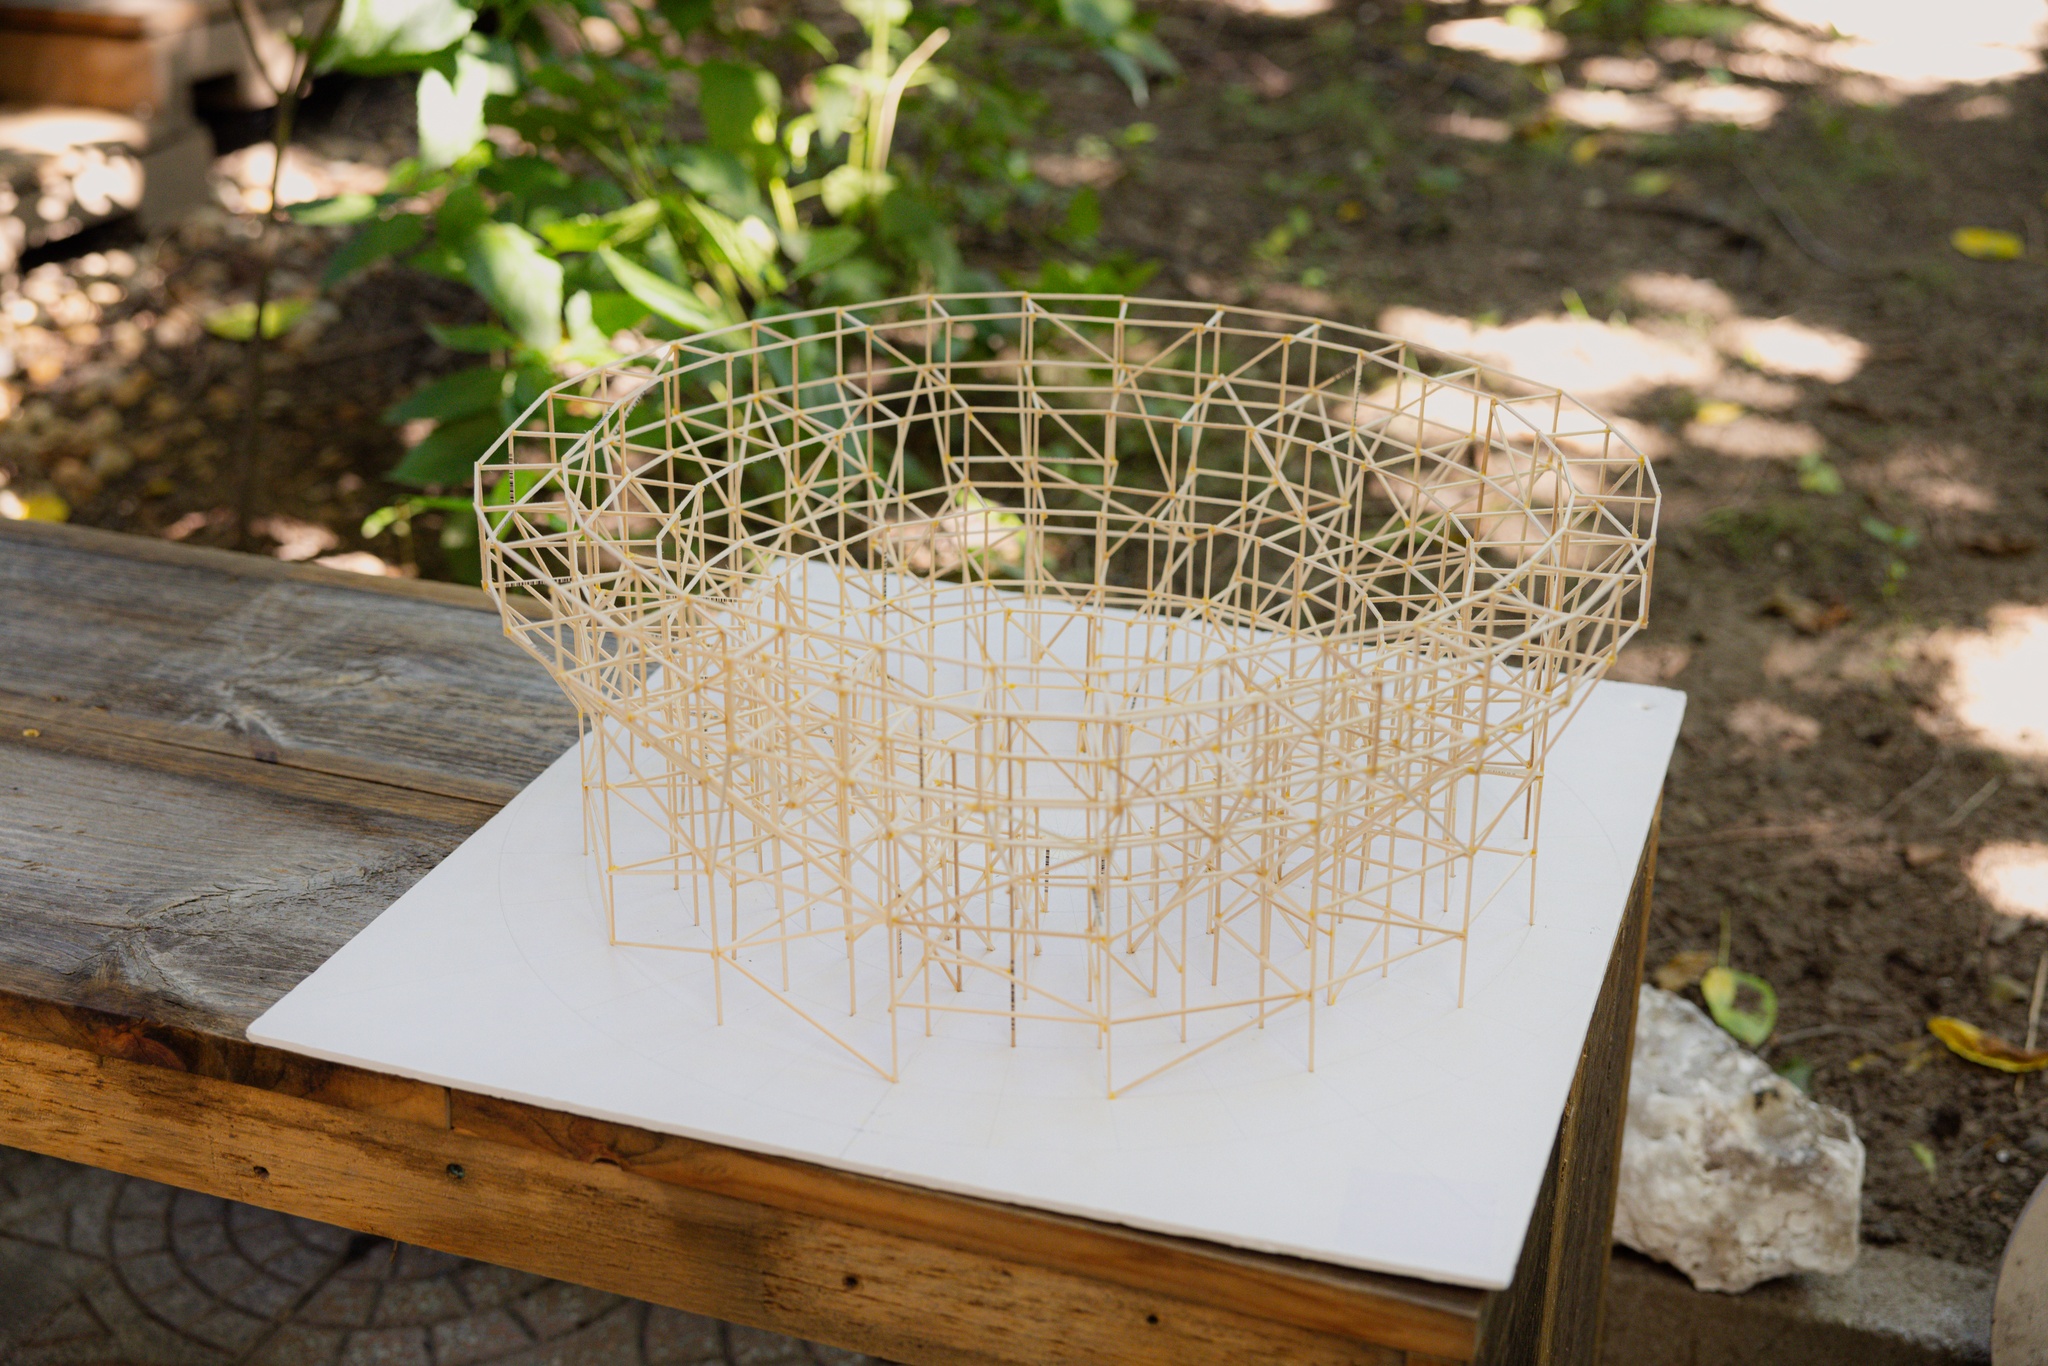 A scale model made of thin toothpick like sticks forms the circular structure of a cockfighting ring. It sits on a wooden table in a shady backyard. 